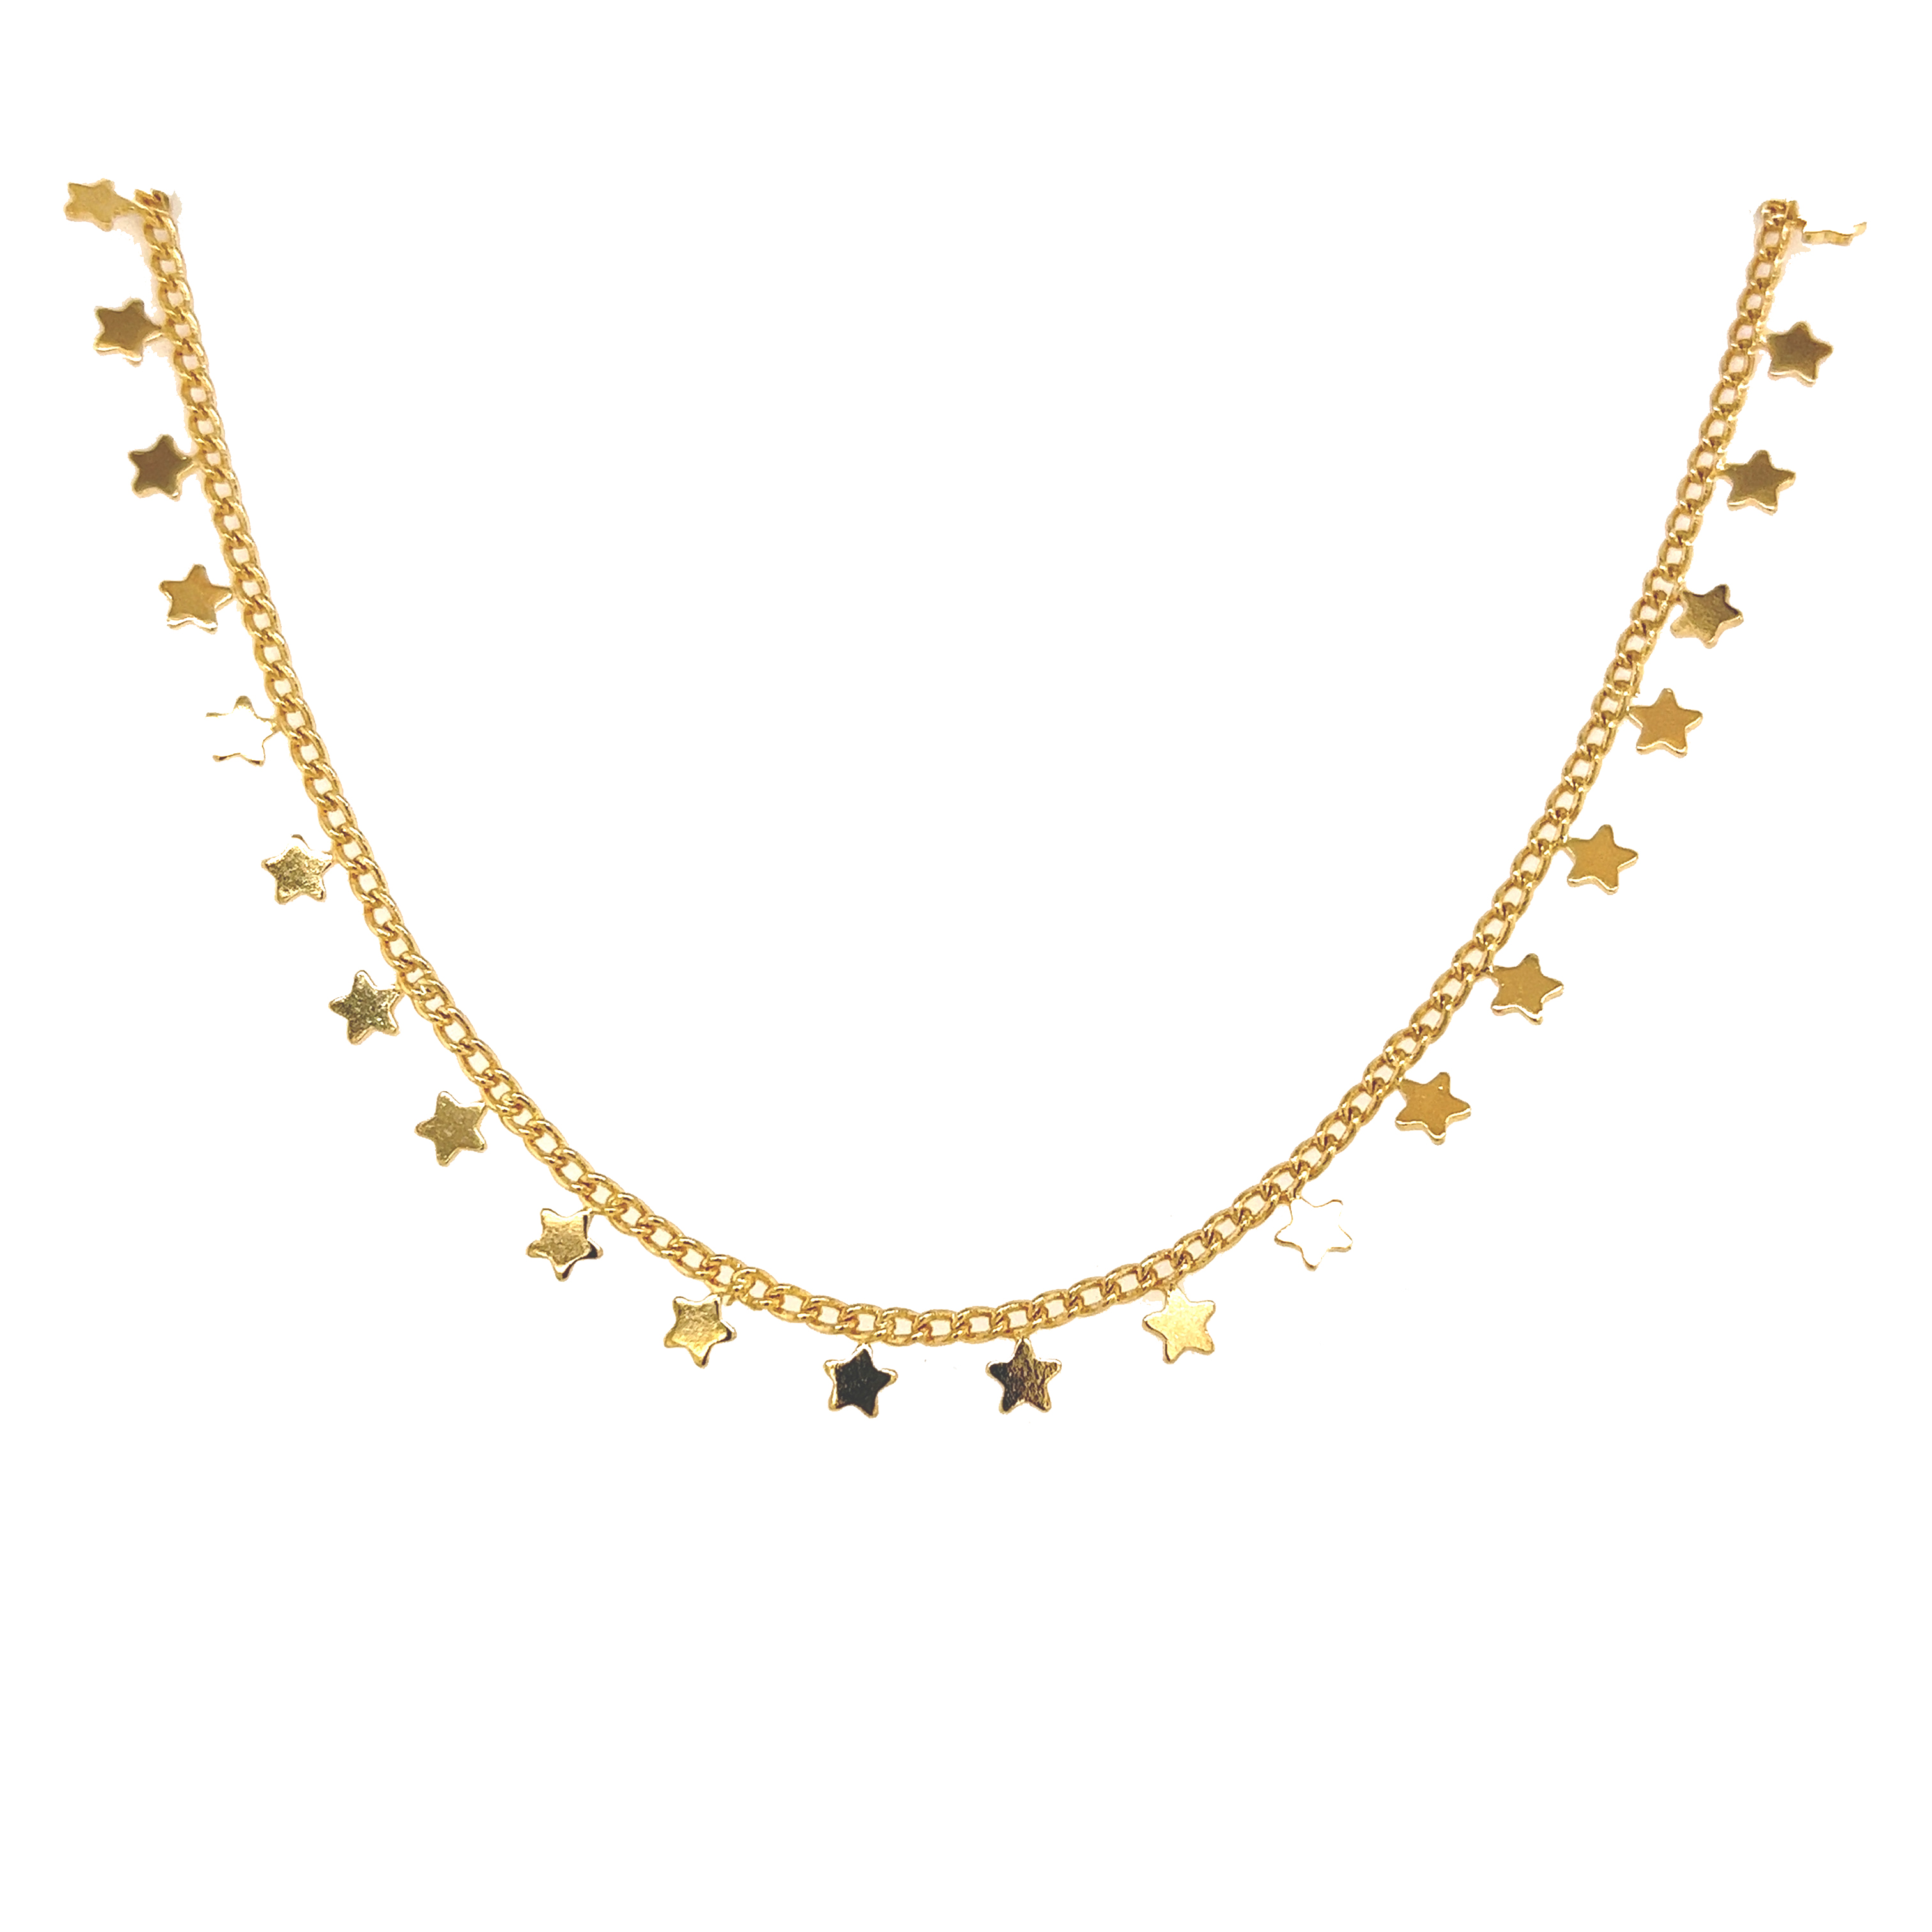 16" Gold Fillled Star Necklace with 2" Extension